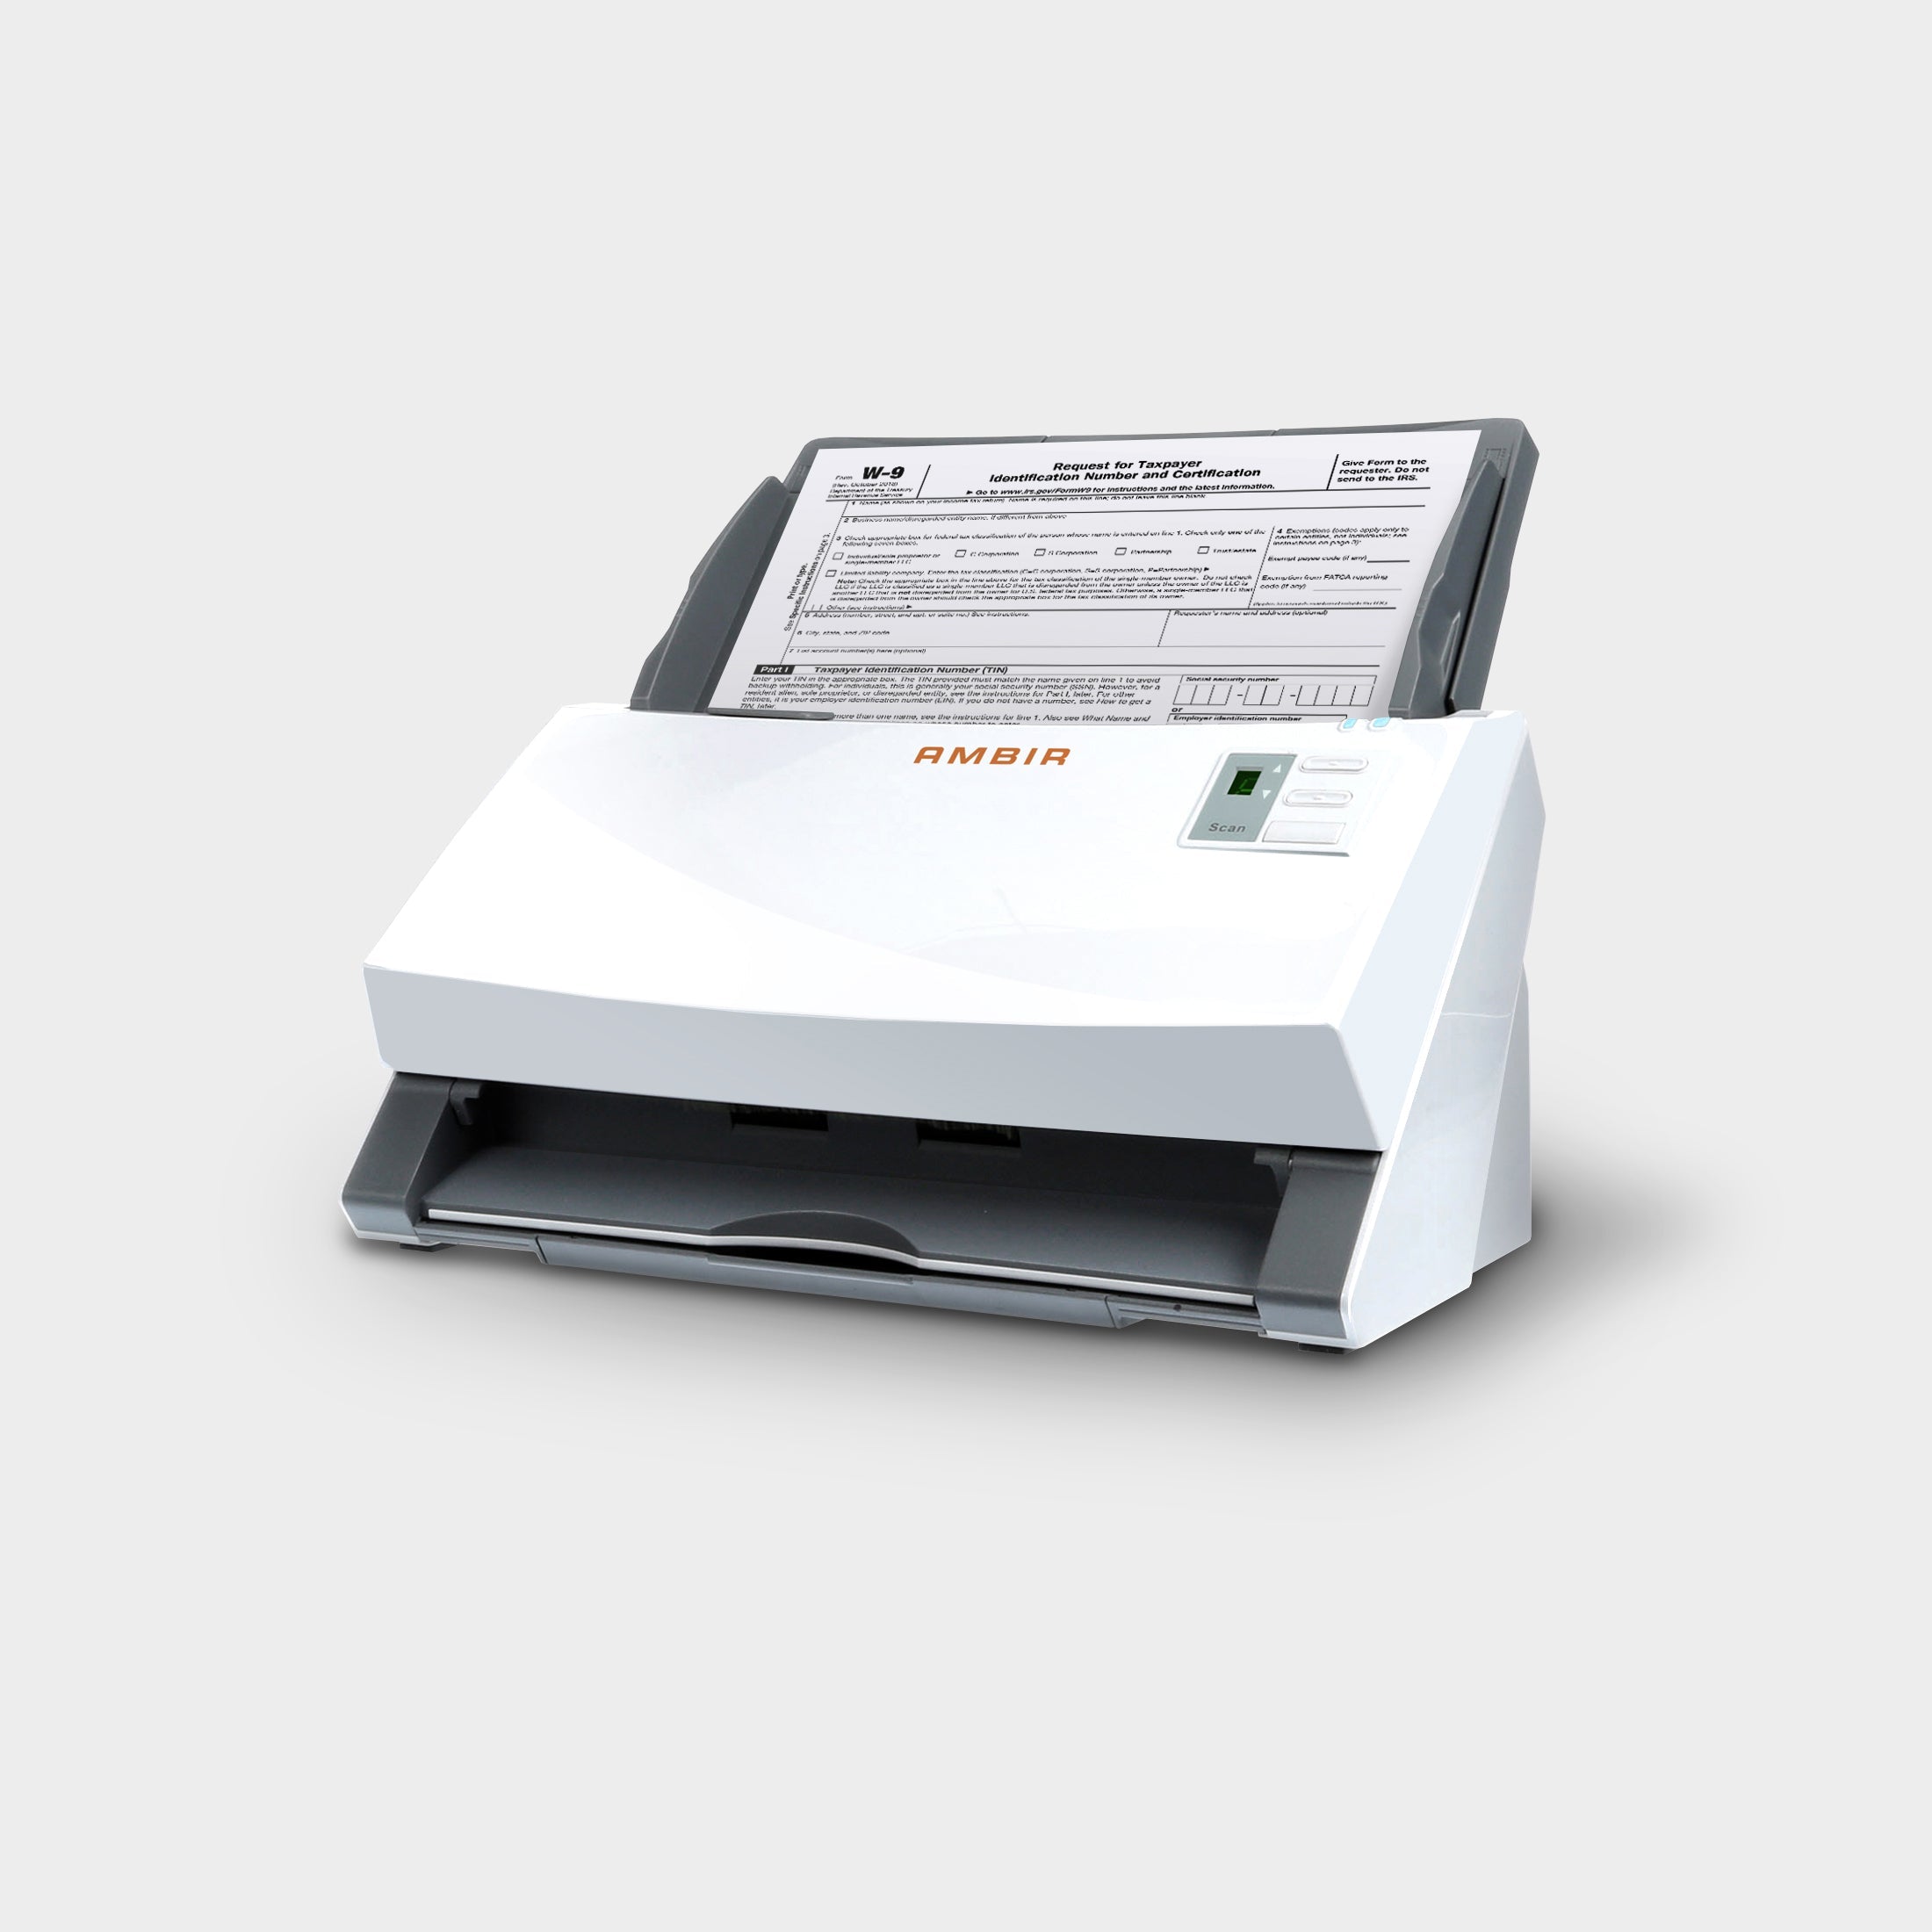 ImageScan Pro 340 High Speed Document Scanner with UltraSonic Misfeed Detection (DS340-CWS) (Copy)